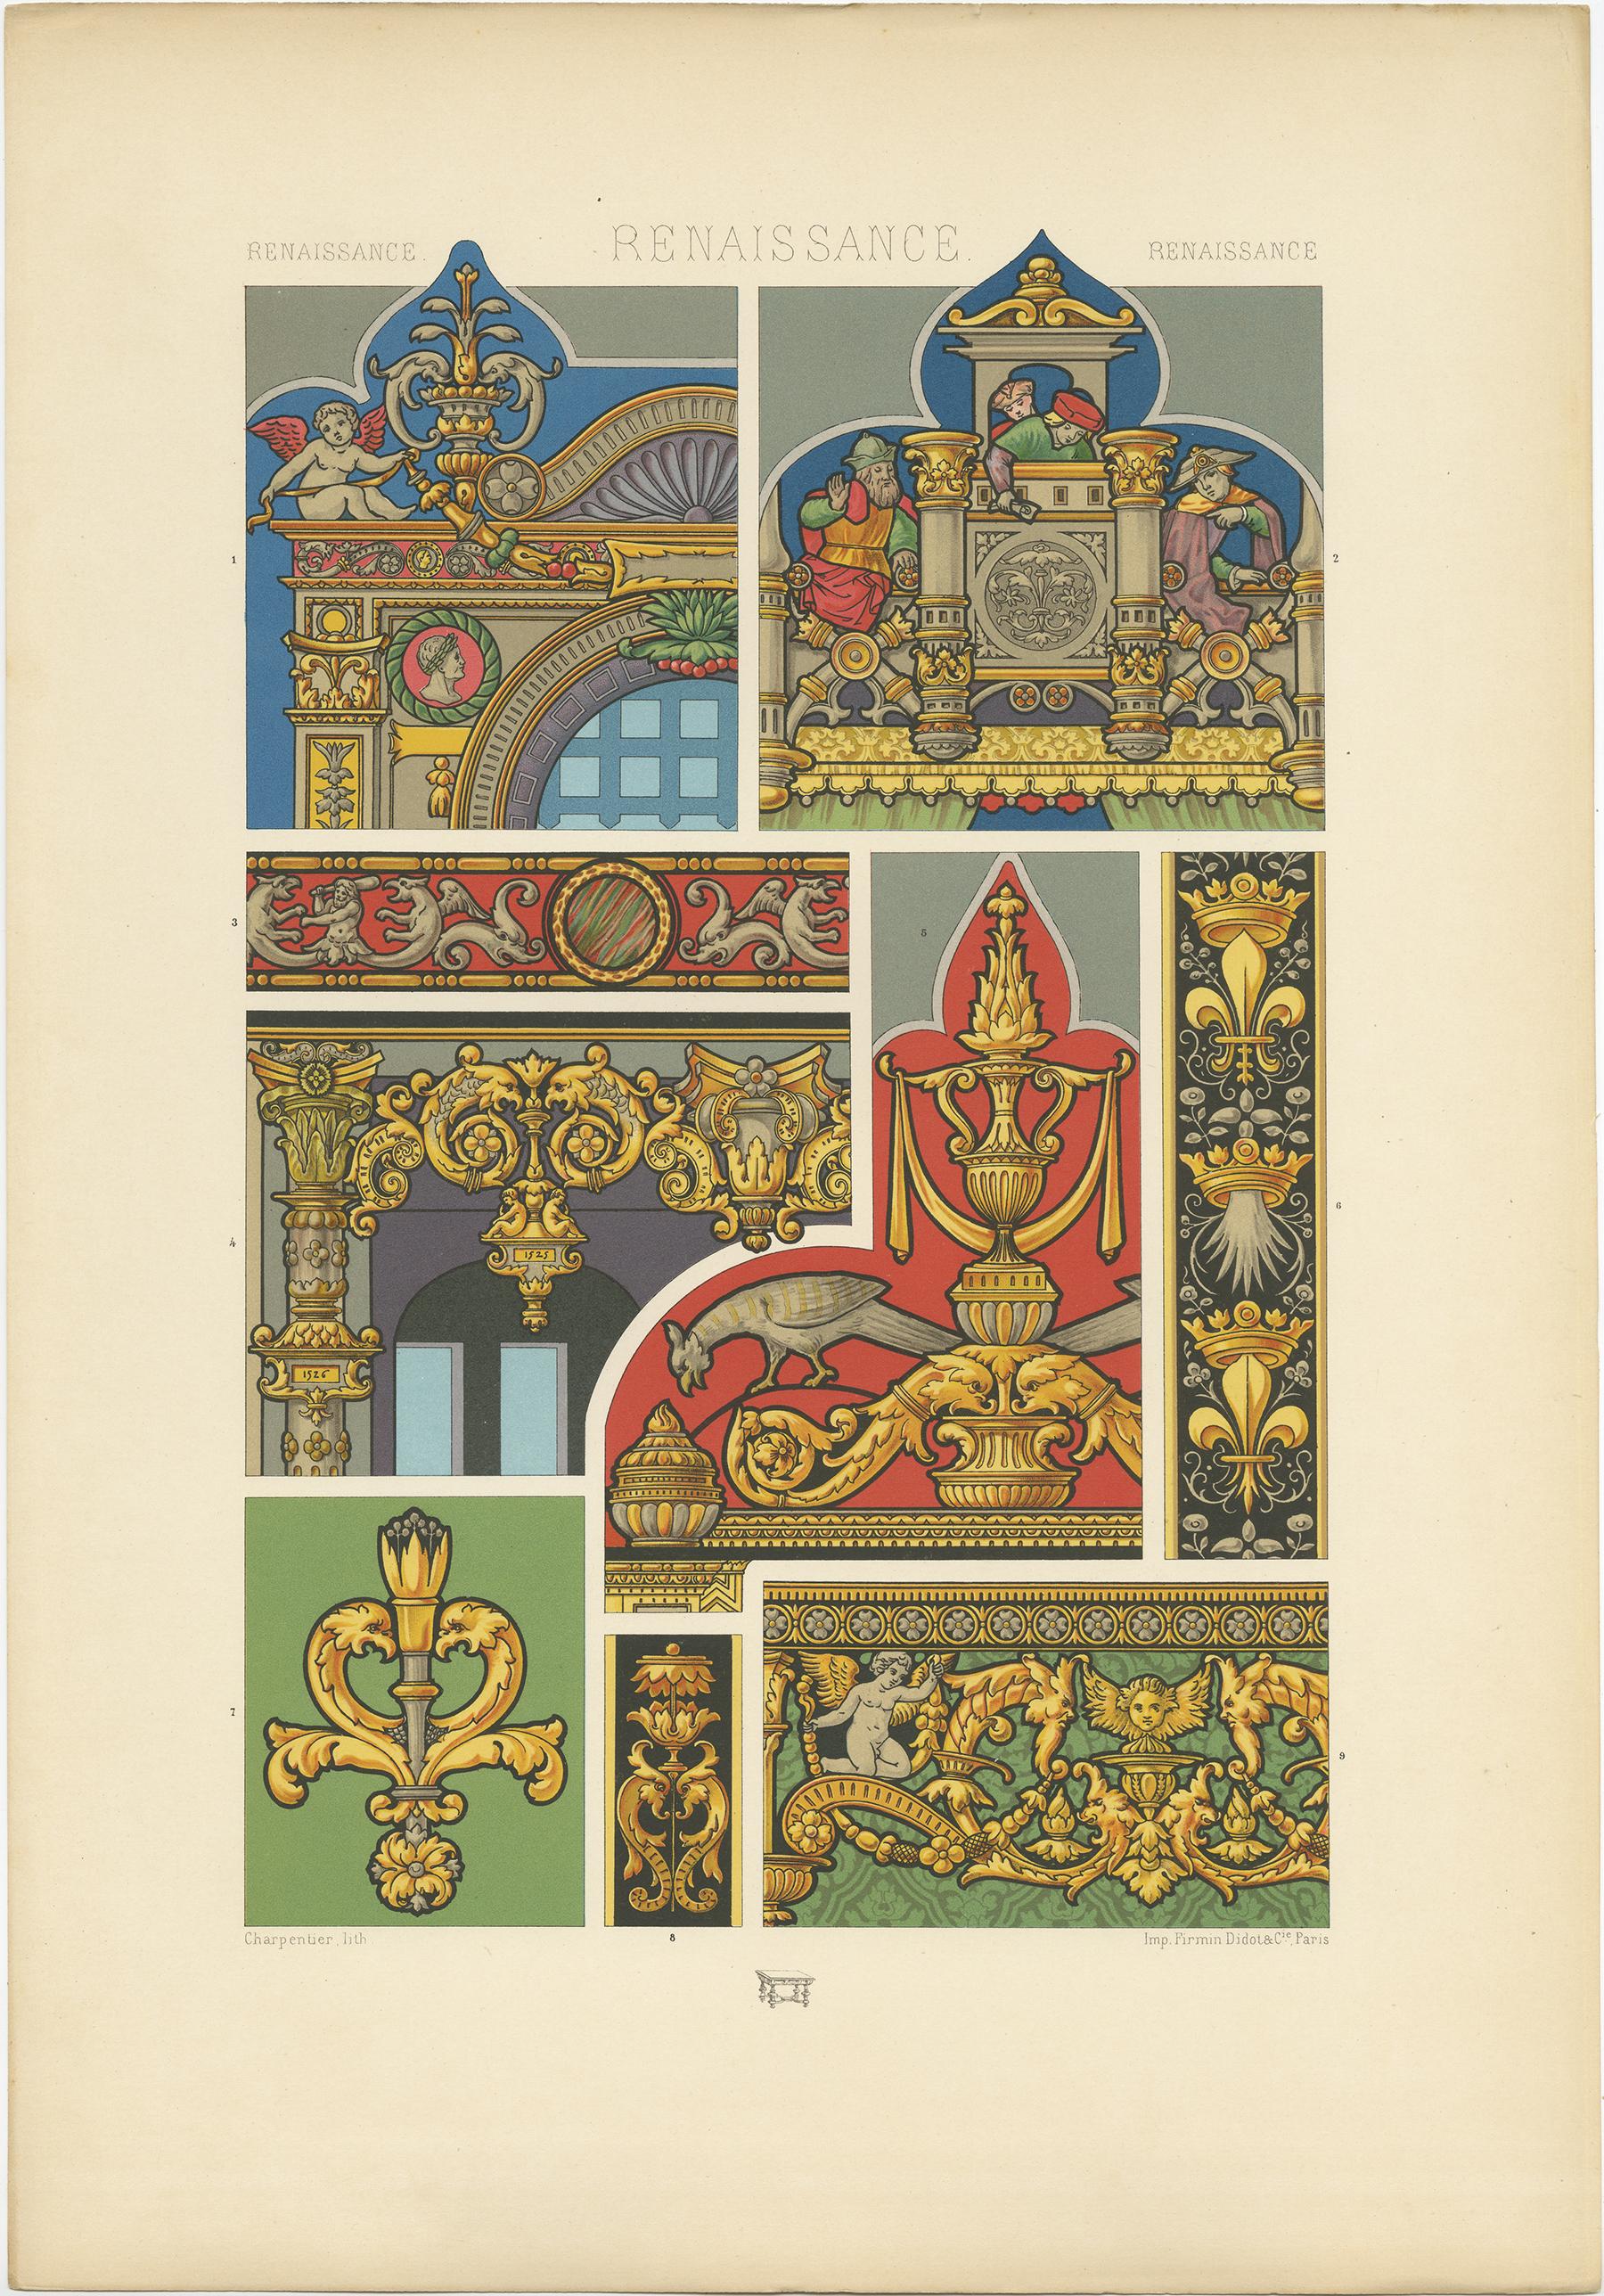 Antique print titled 'Renaissance - Renaissance - Renaissance'. Chromolithograph of architectural motifs from stained glass, France 16th century ornaments. This print originates from 'l'Ornement Polychrome' by Auguste Racinet. Published circa 1890.